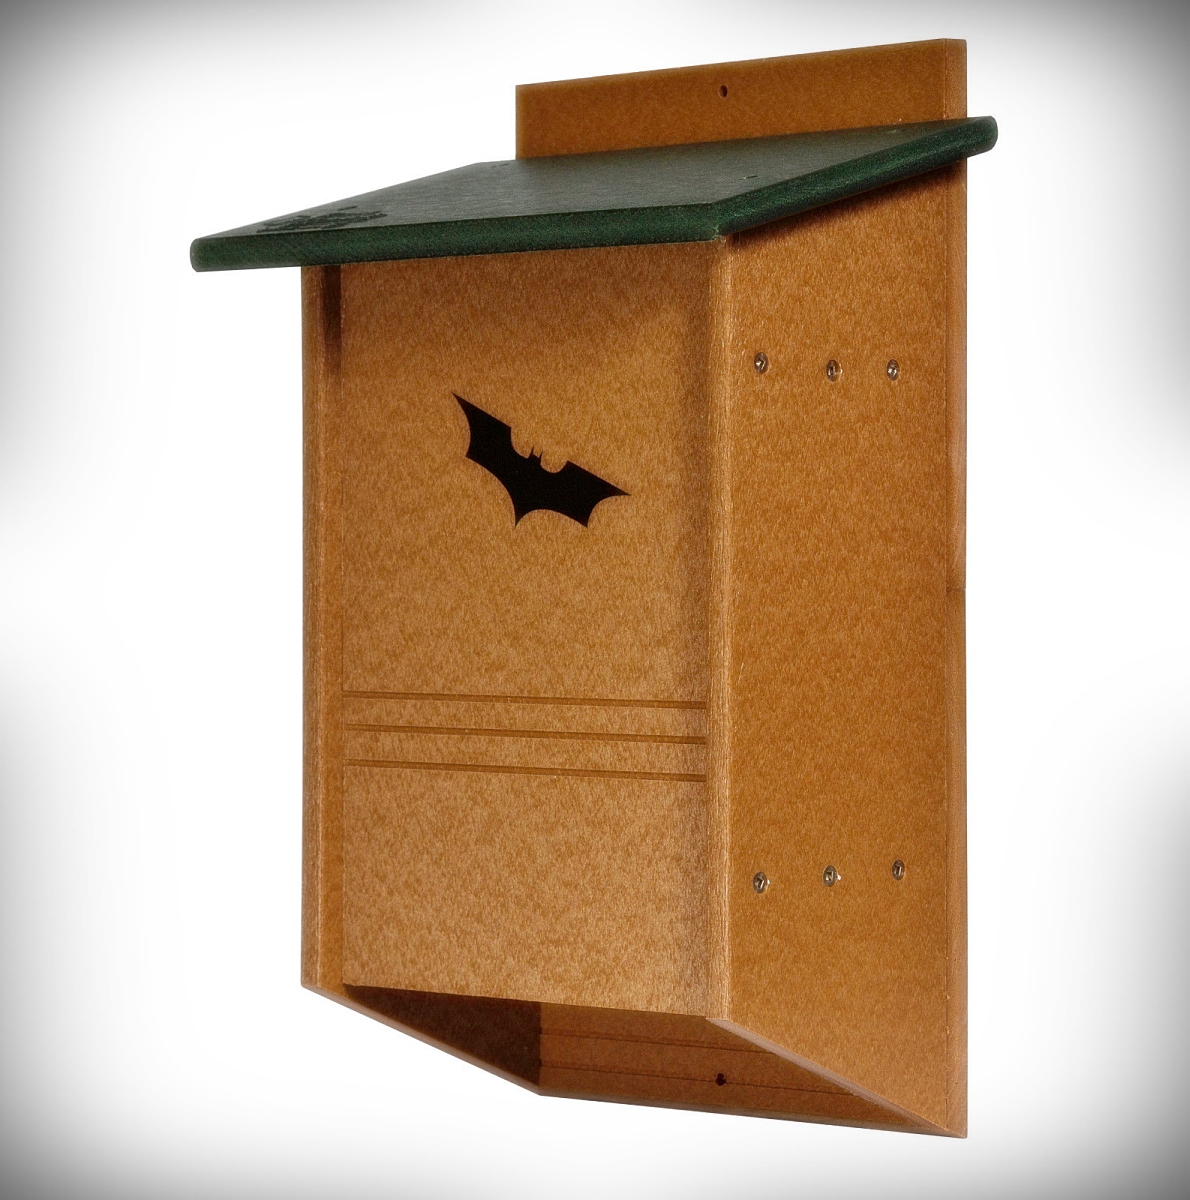 Amish Recycled Poly 40 Colony Bat House